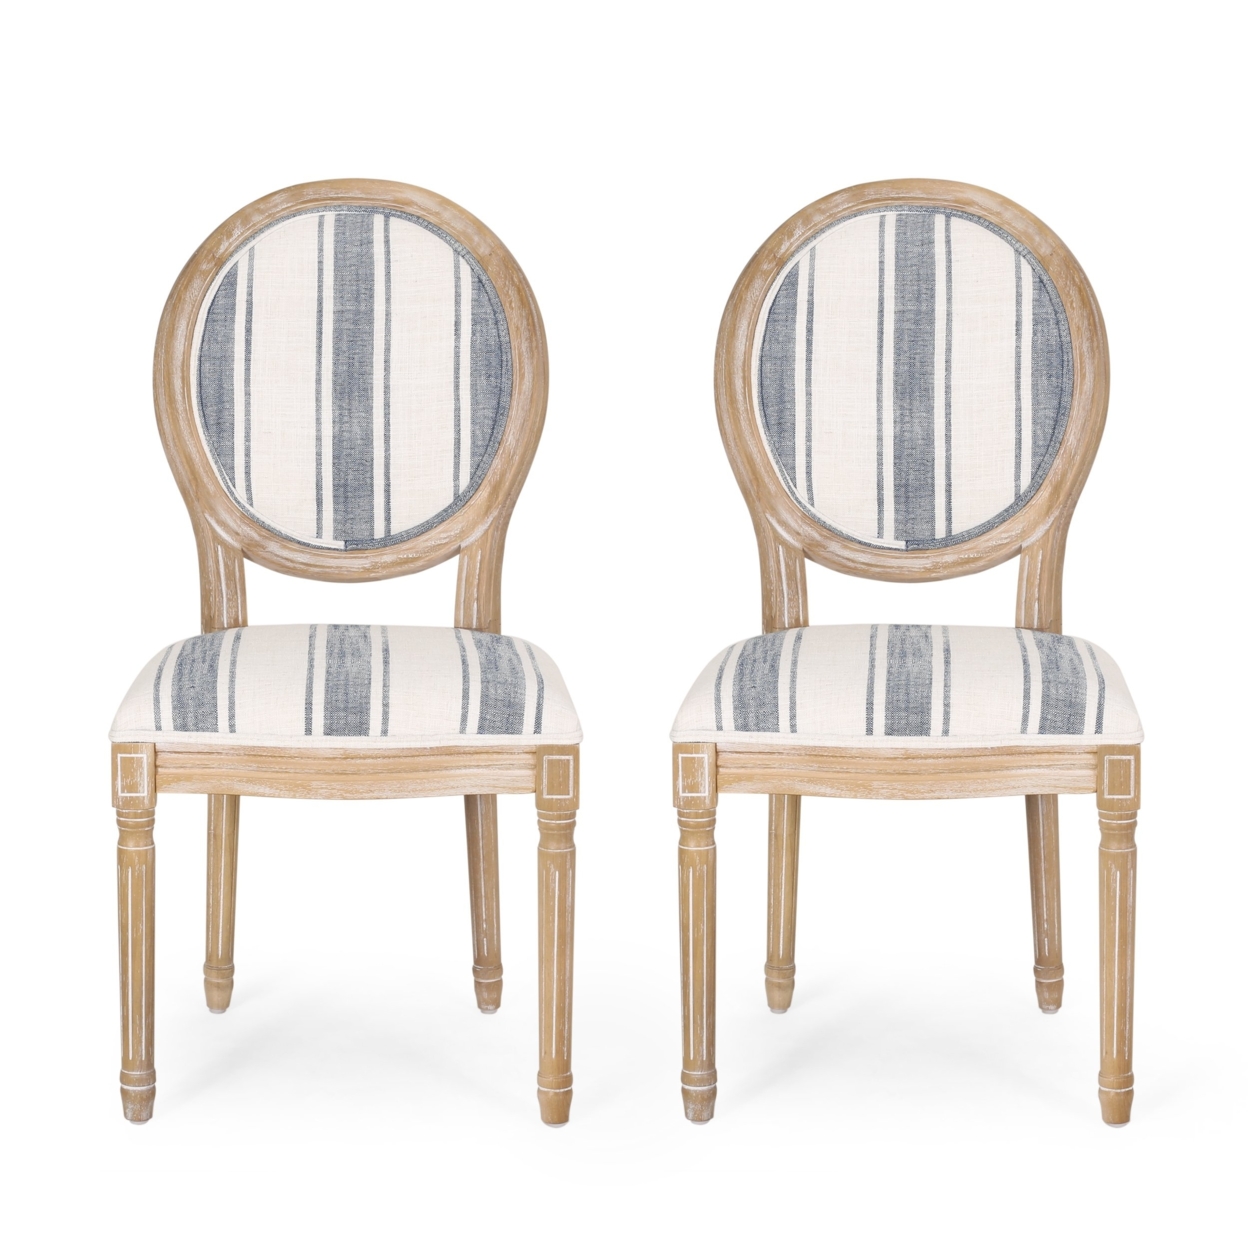 Lariya French Country Fabric Dining Chairs - Grey Line, Set Of 2